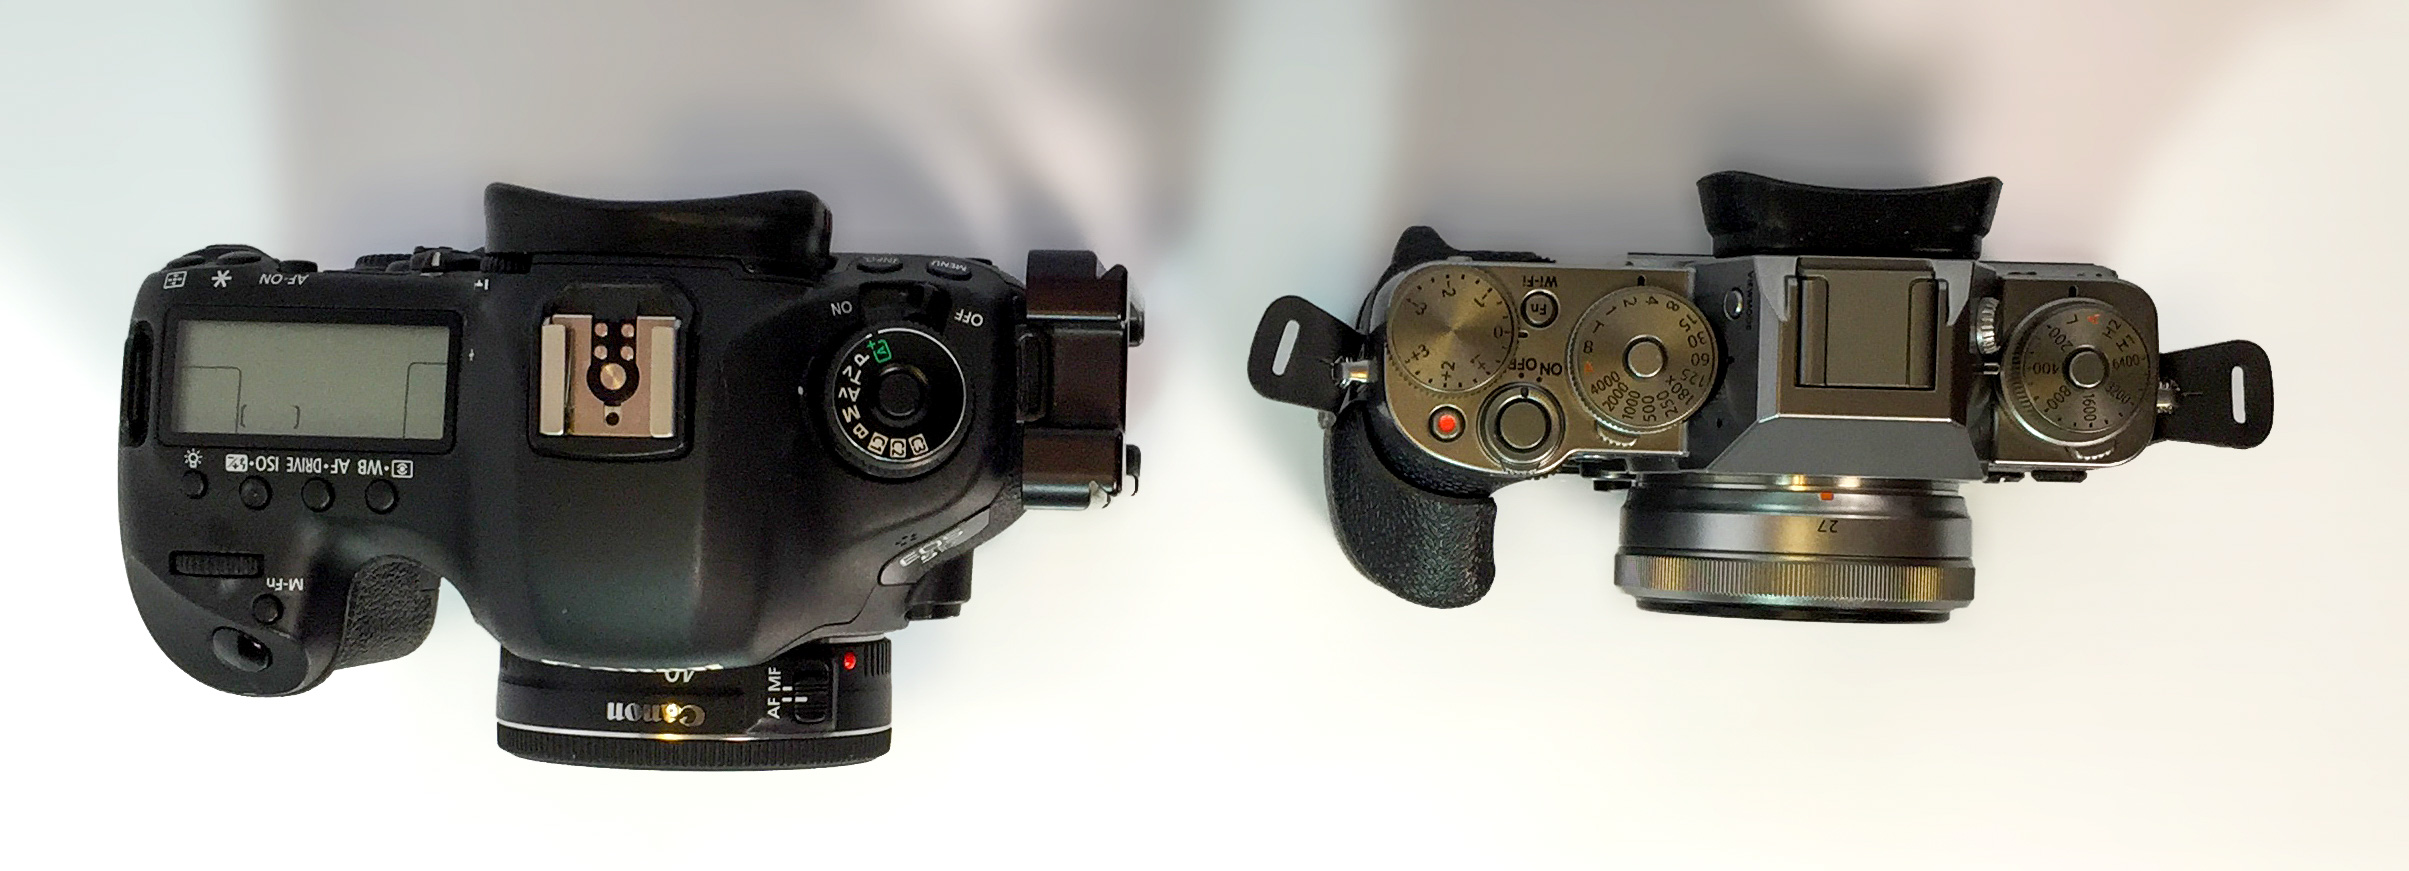 Bird's eye view of a DSLR and a Mirrorless camera and the DSLR is thicker.